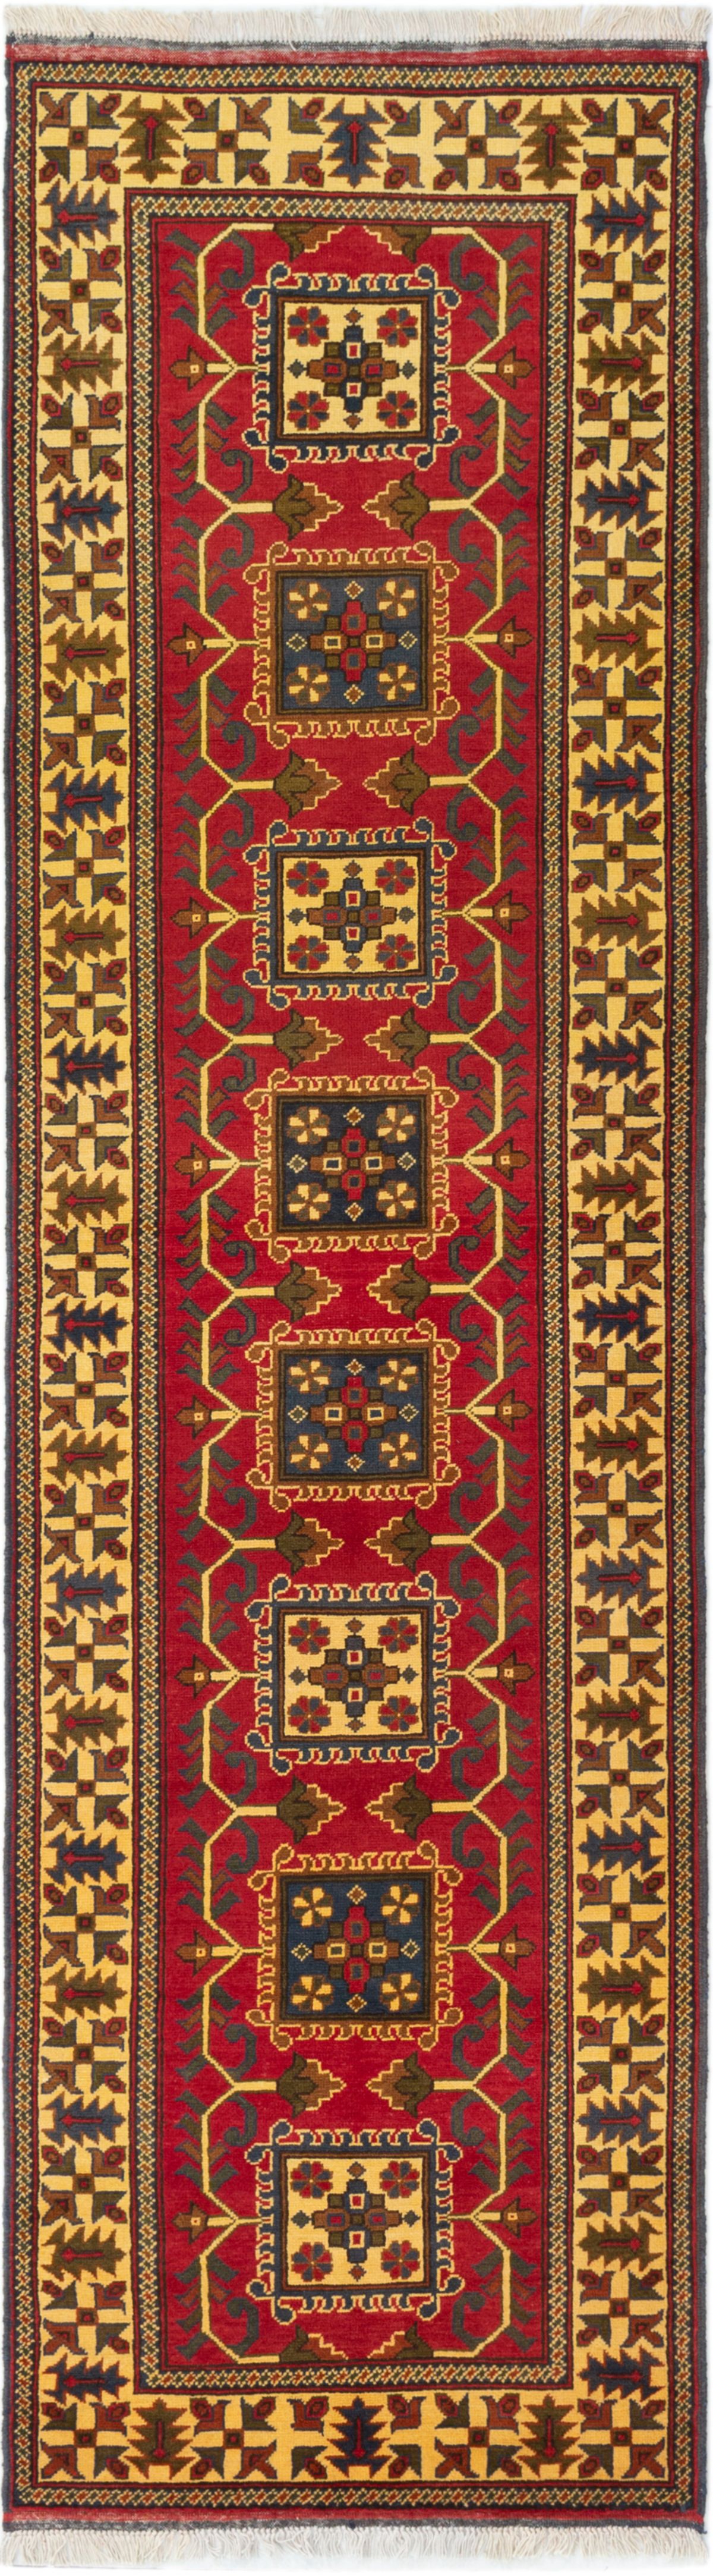 Hand-knotted Finest Kargahi Red Wool Rug 2'9" x 9'11" Size: 2'9" x 9'11"  